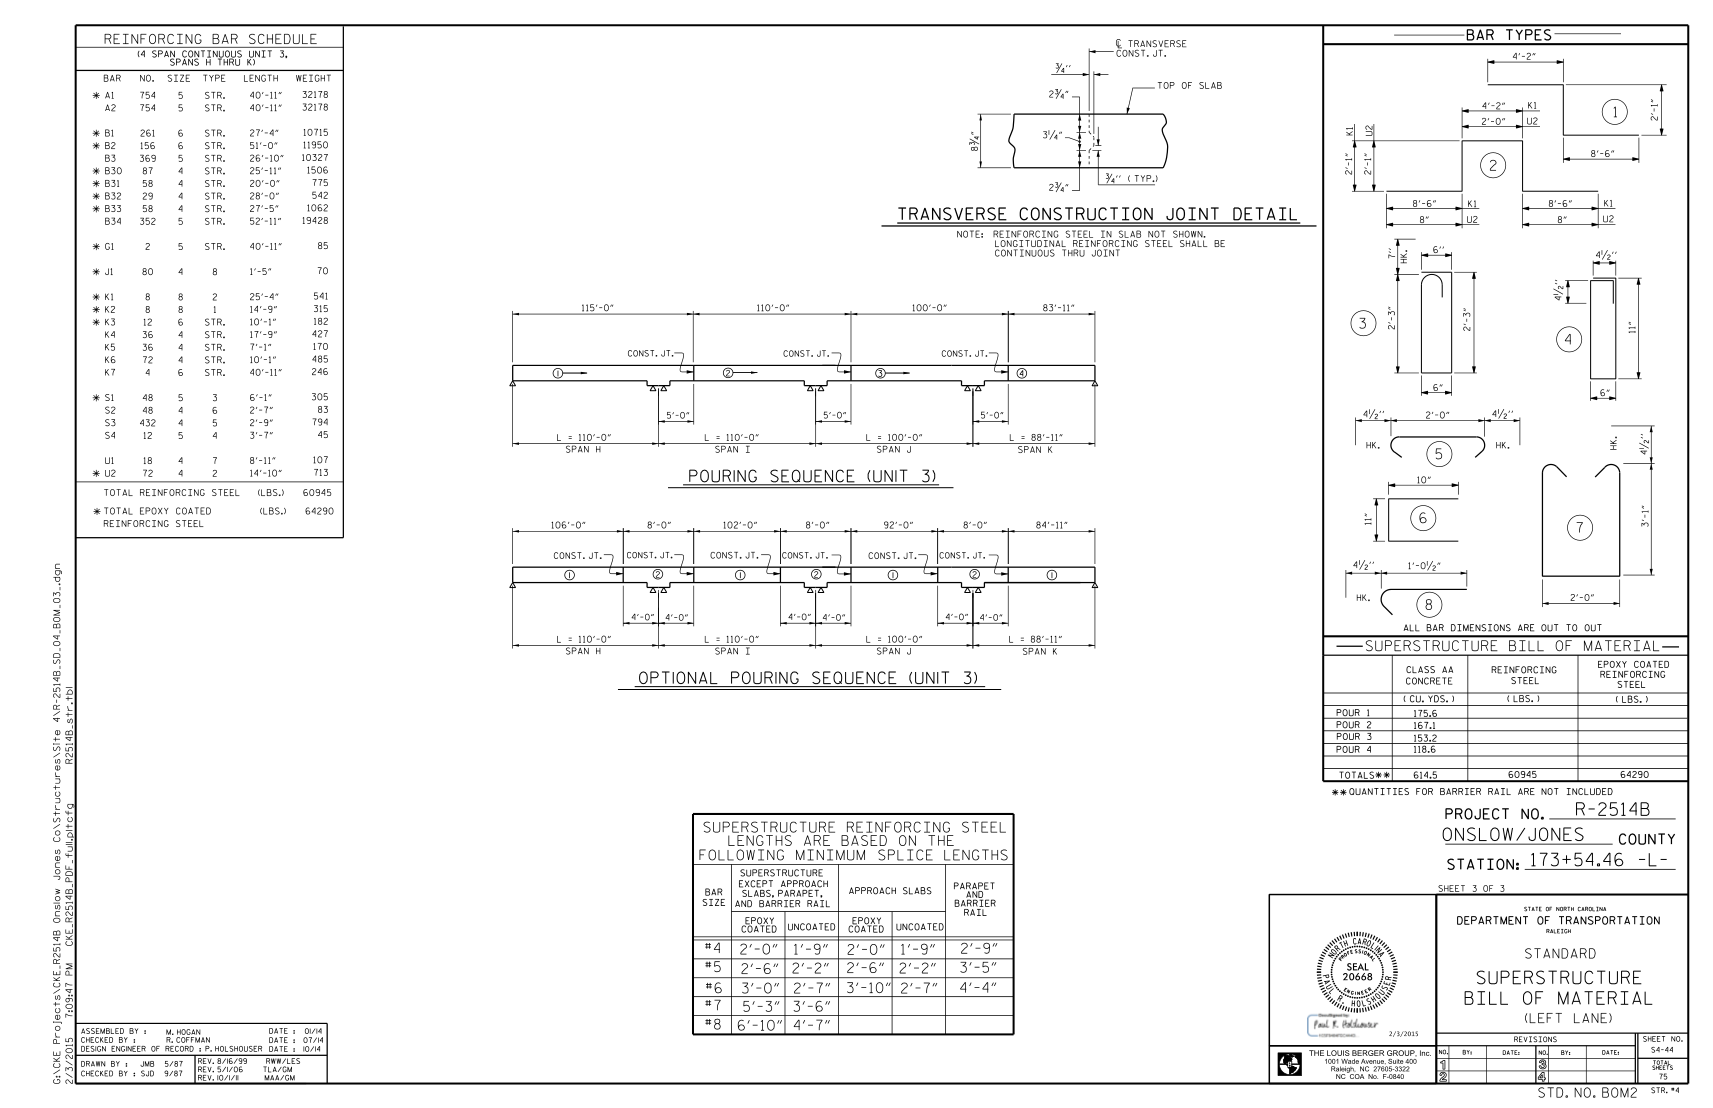 373940150-superstructure-bill-of-material-r-2514b-1735446-l-bb-ncdot